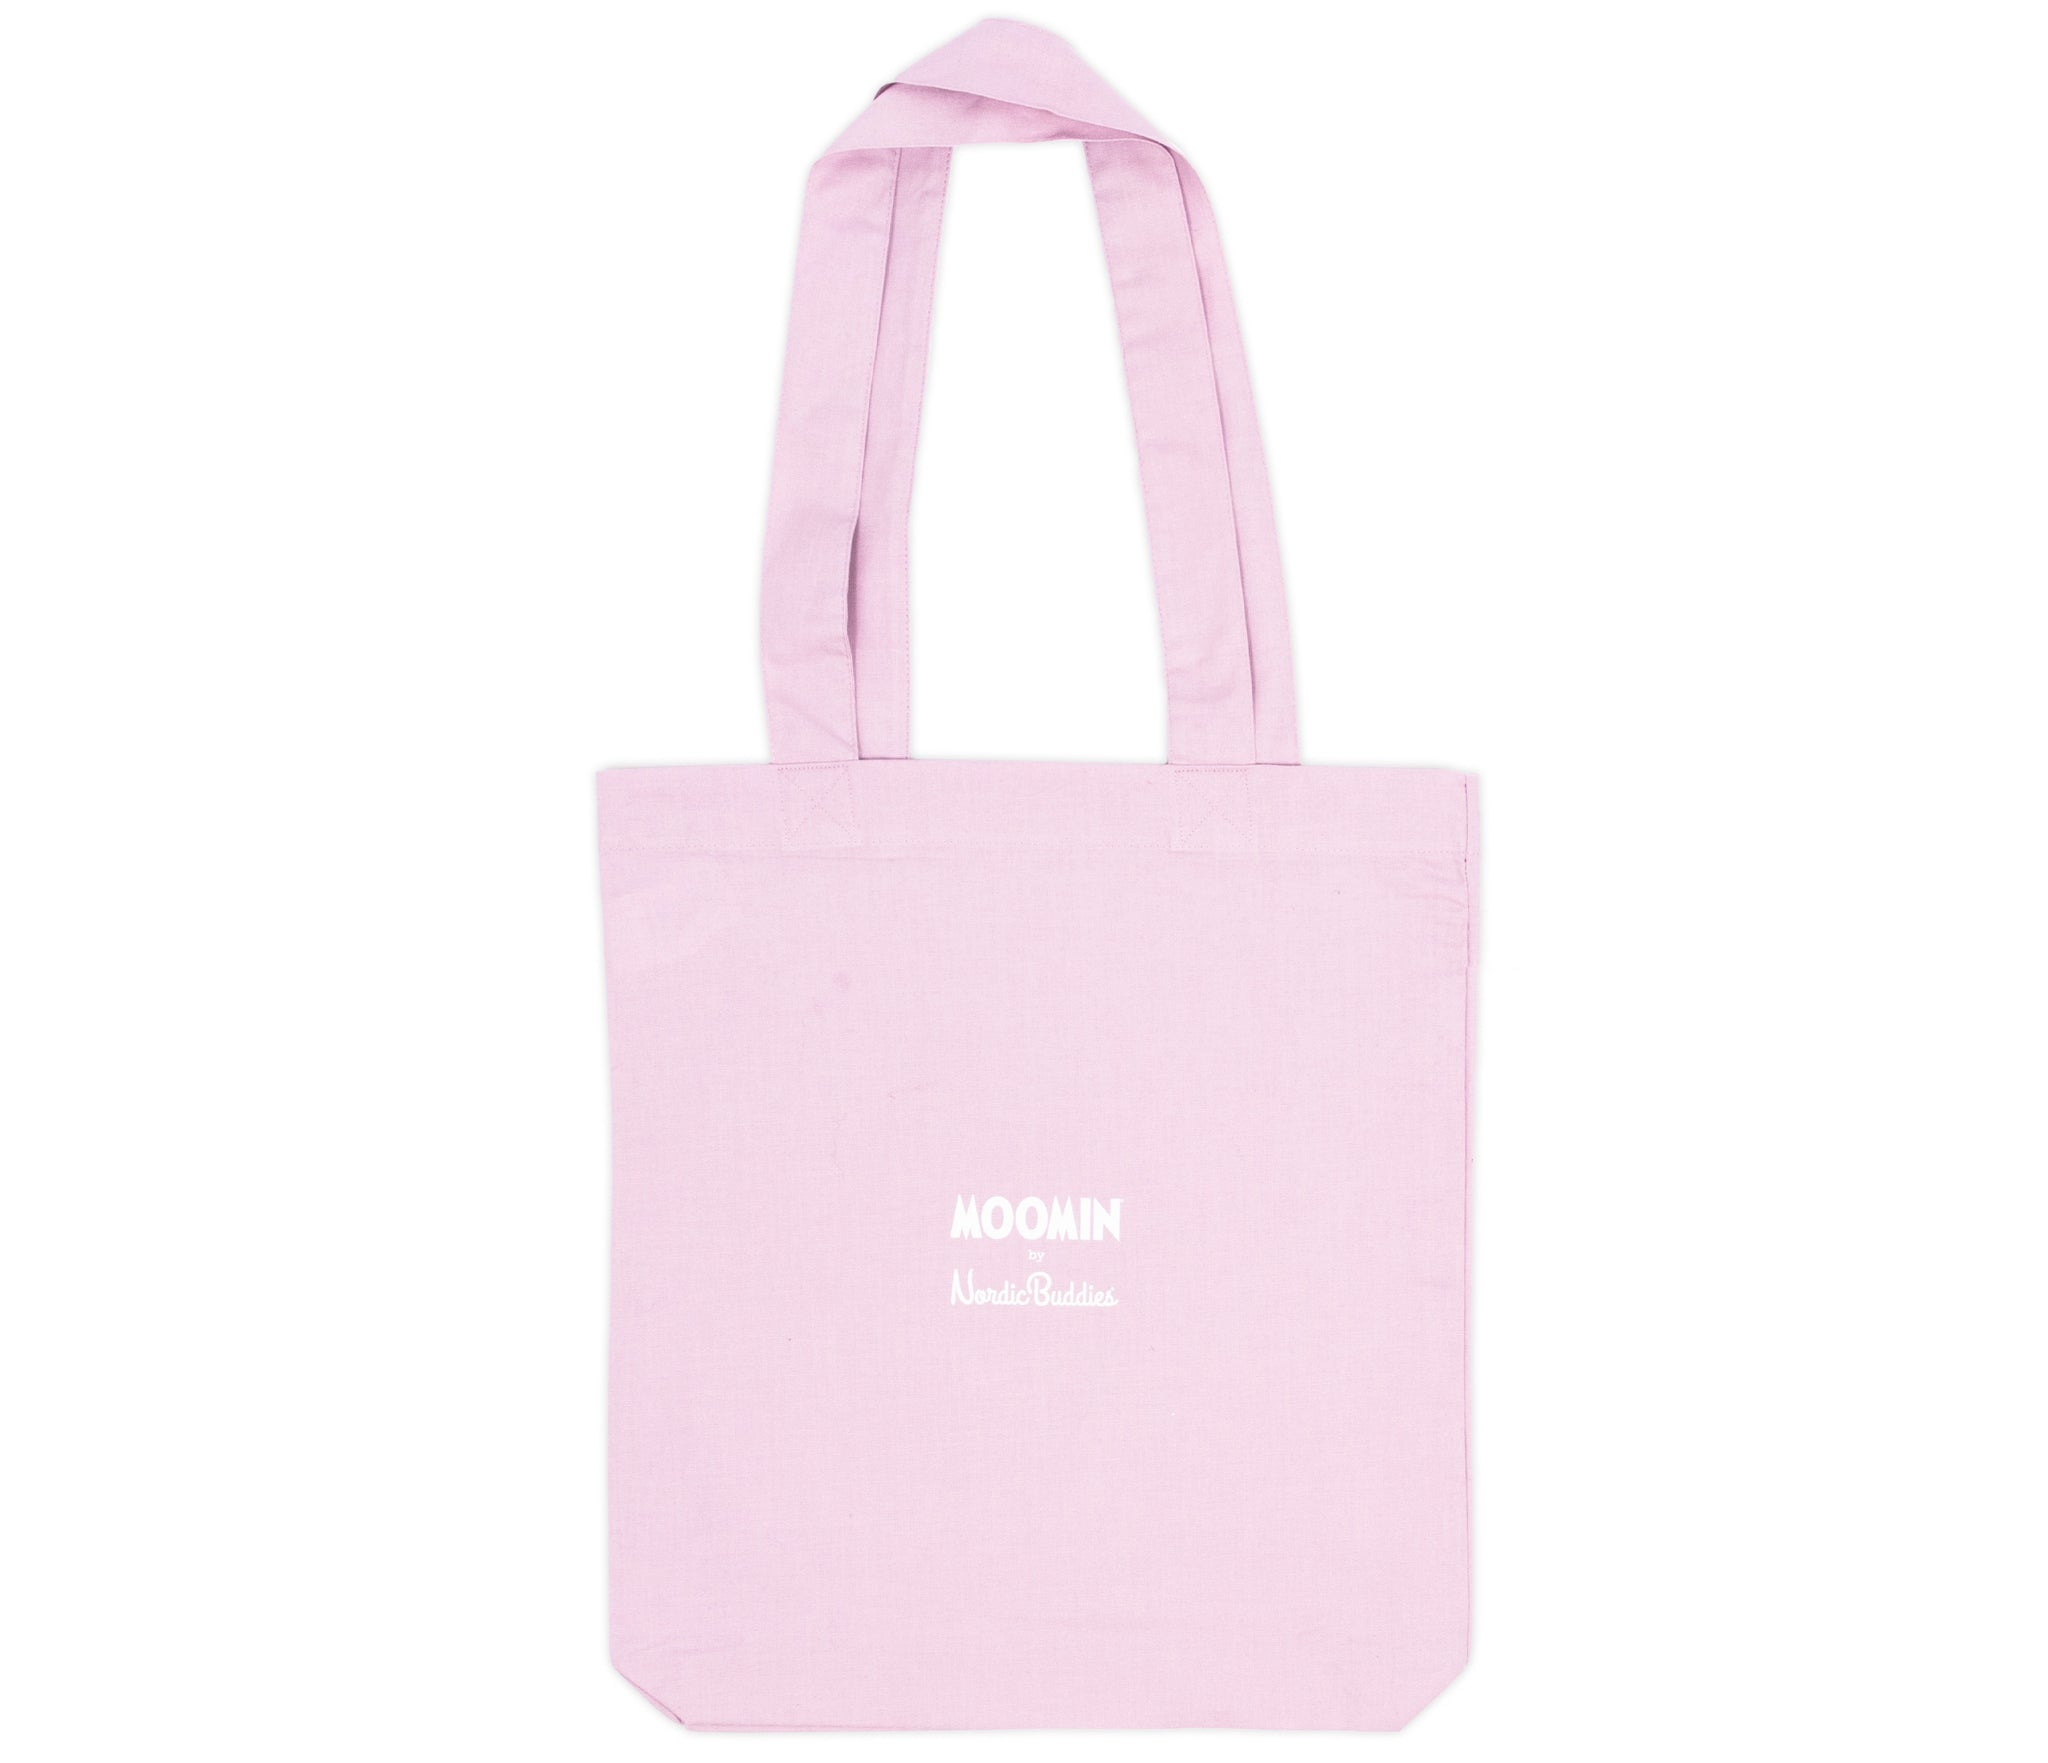 Little My Tote Bag - Pink